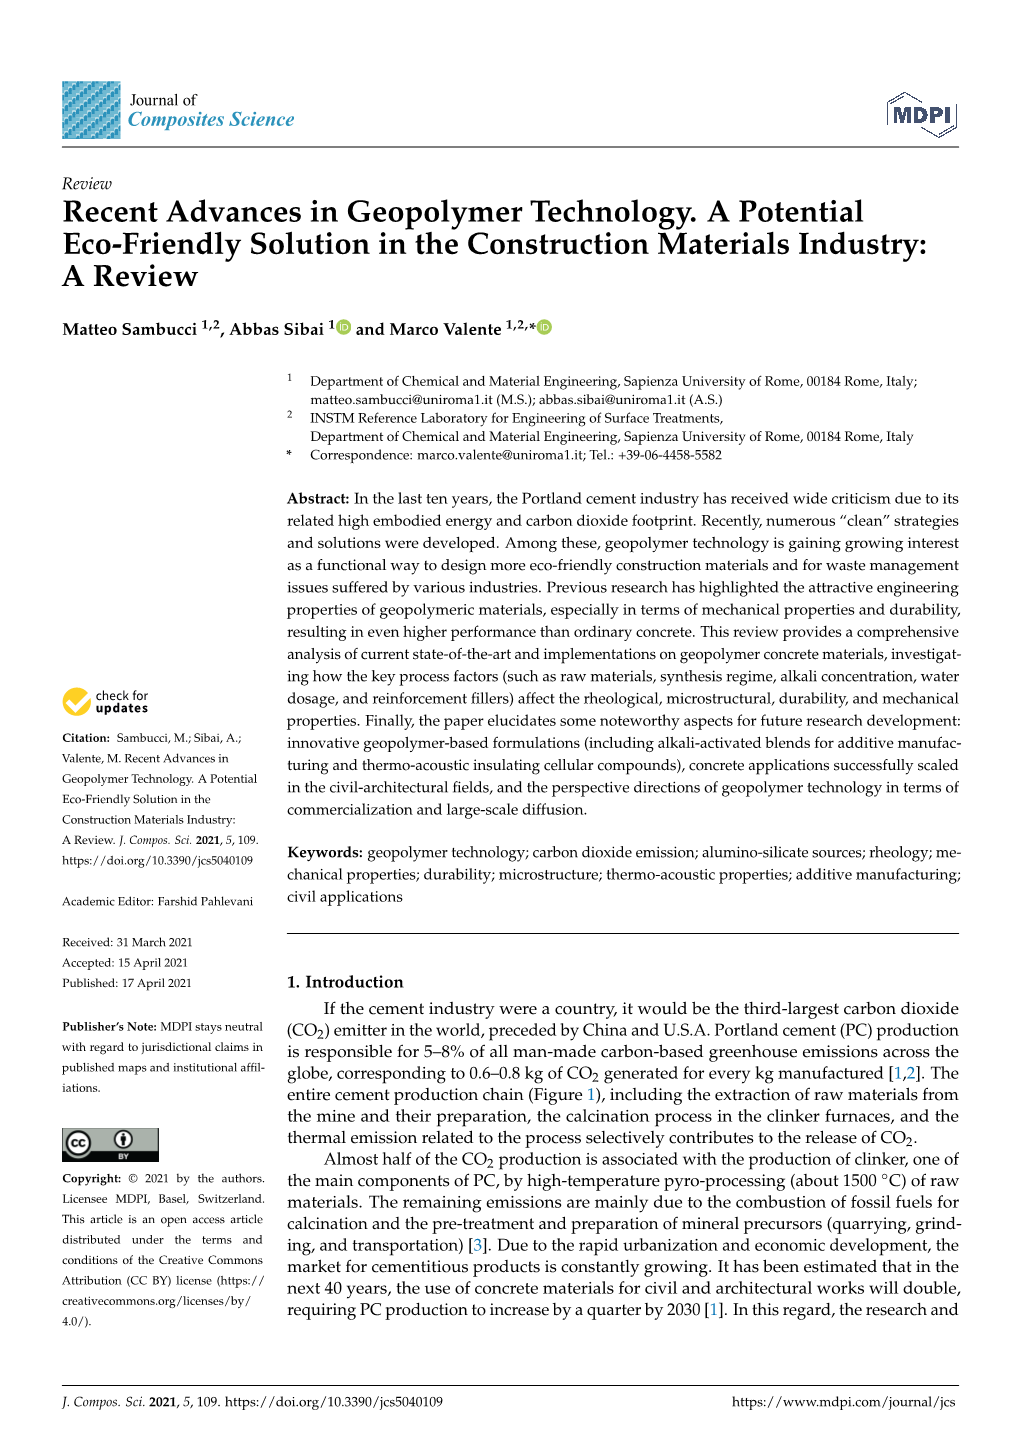 Recent Advances in Geopolymer Technology. a Potential Eco-Friendly Solution in the Construction Materials Industry: a Review